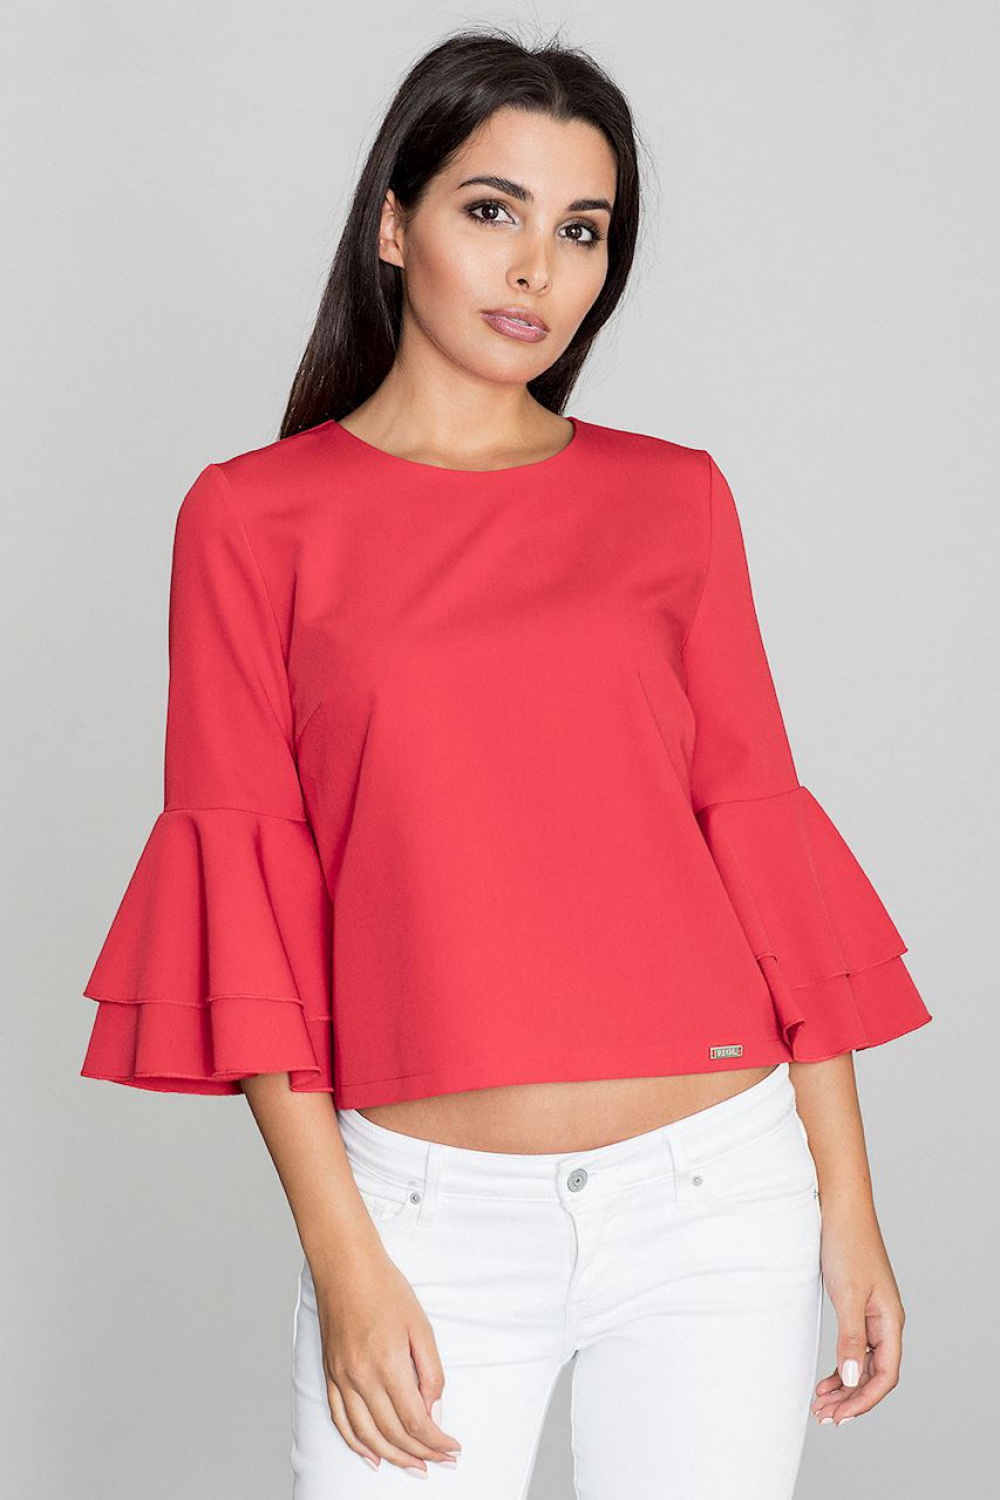  Blouse model 111073 Figl  red